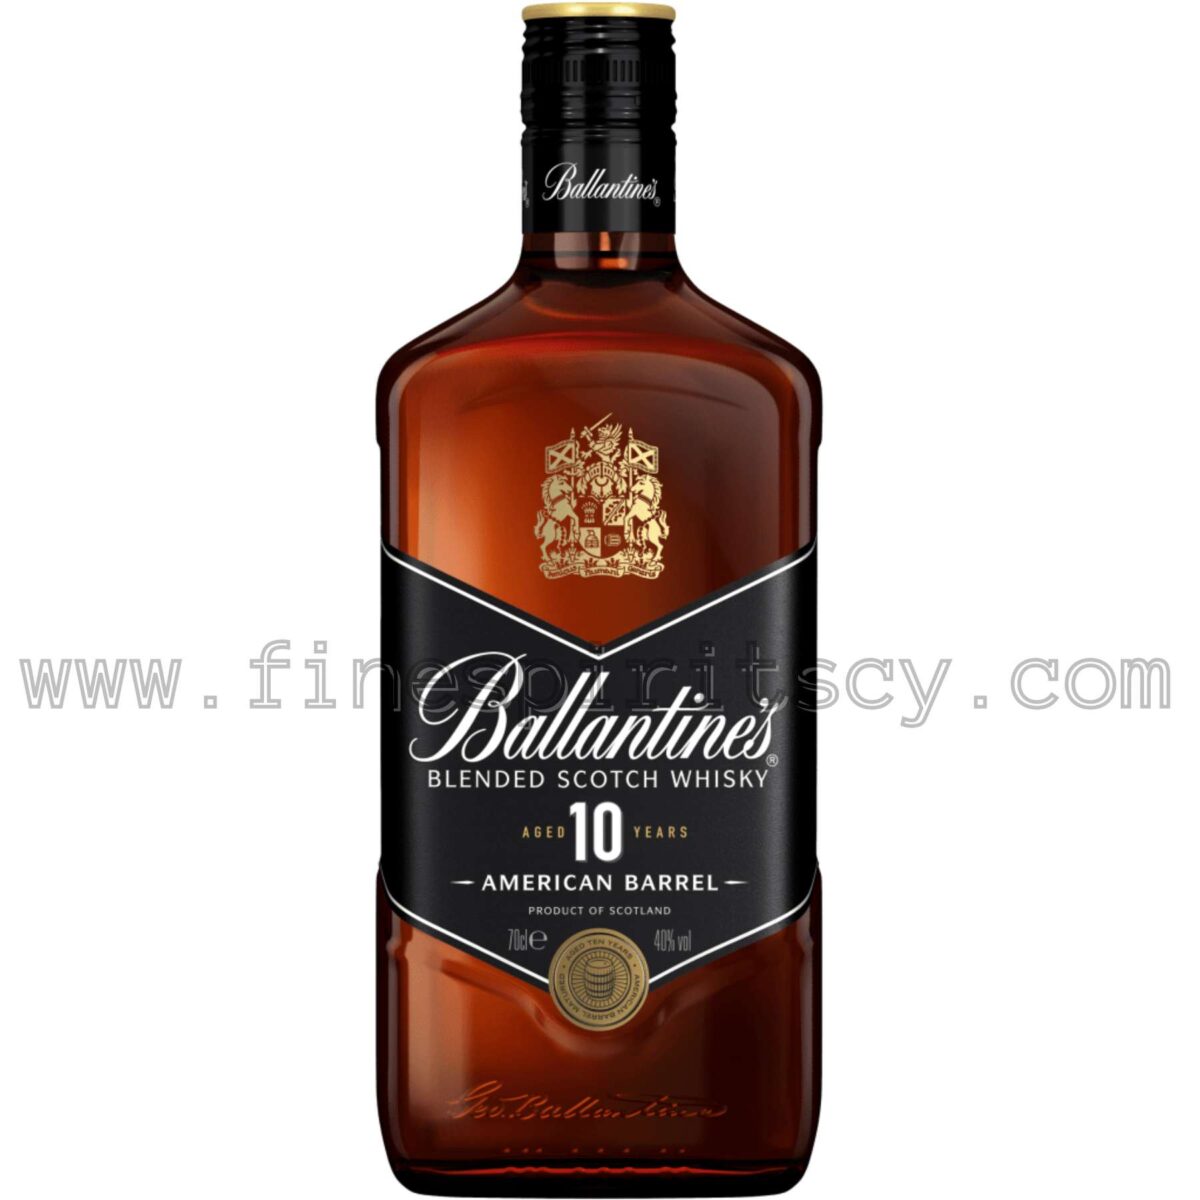 Ballantines 10 Year Old CY American Barrel Scotch Price Whisky Cyprus Online